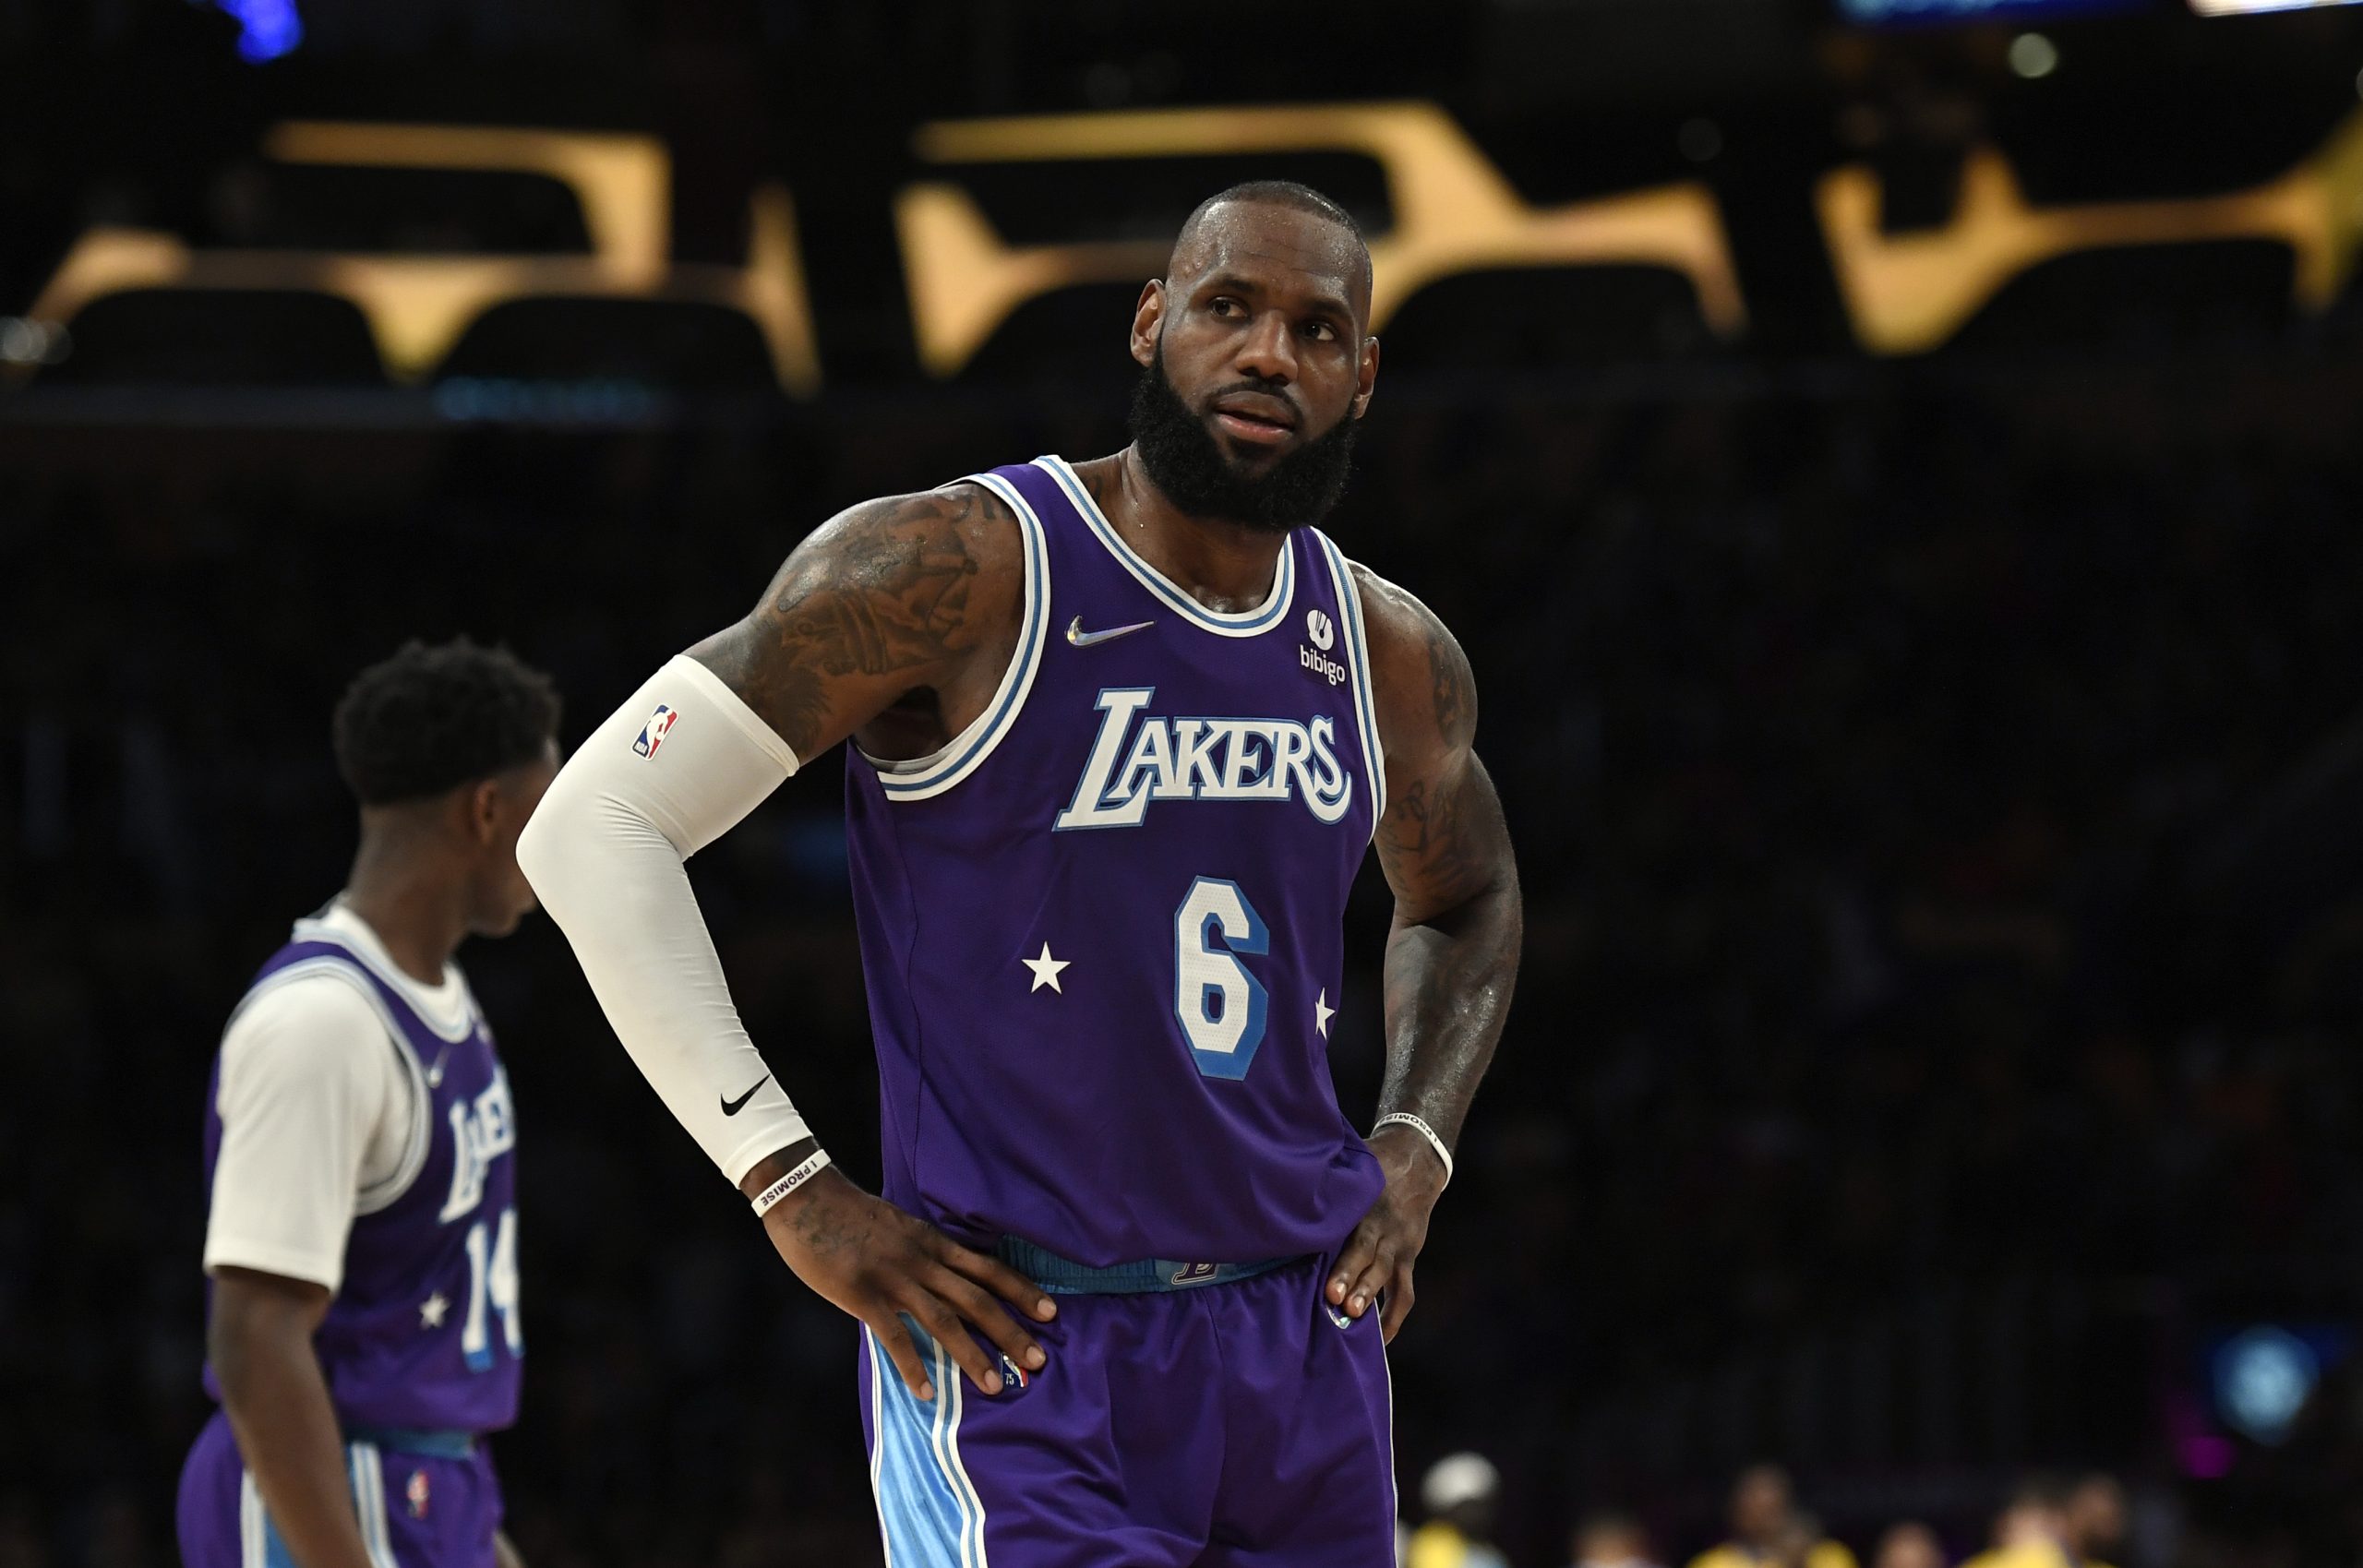 LeBron James of the Los Angeles Lakers reacts in the closing seconds of the game against the New Orleans Pelicans.